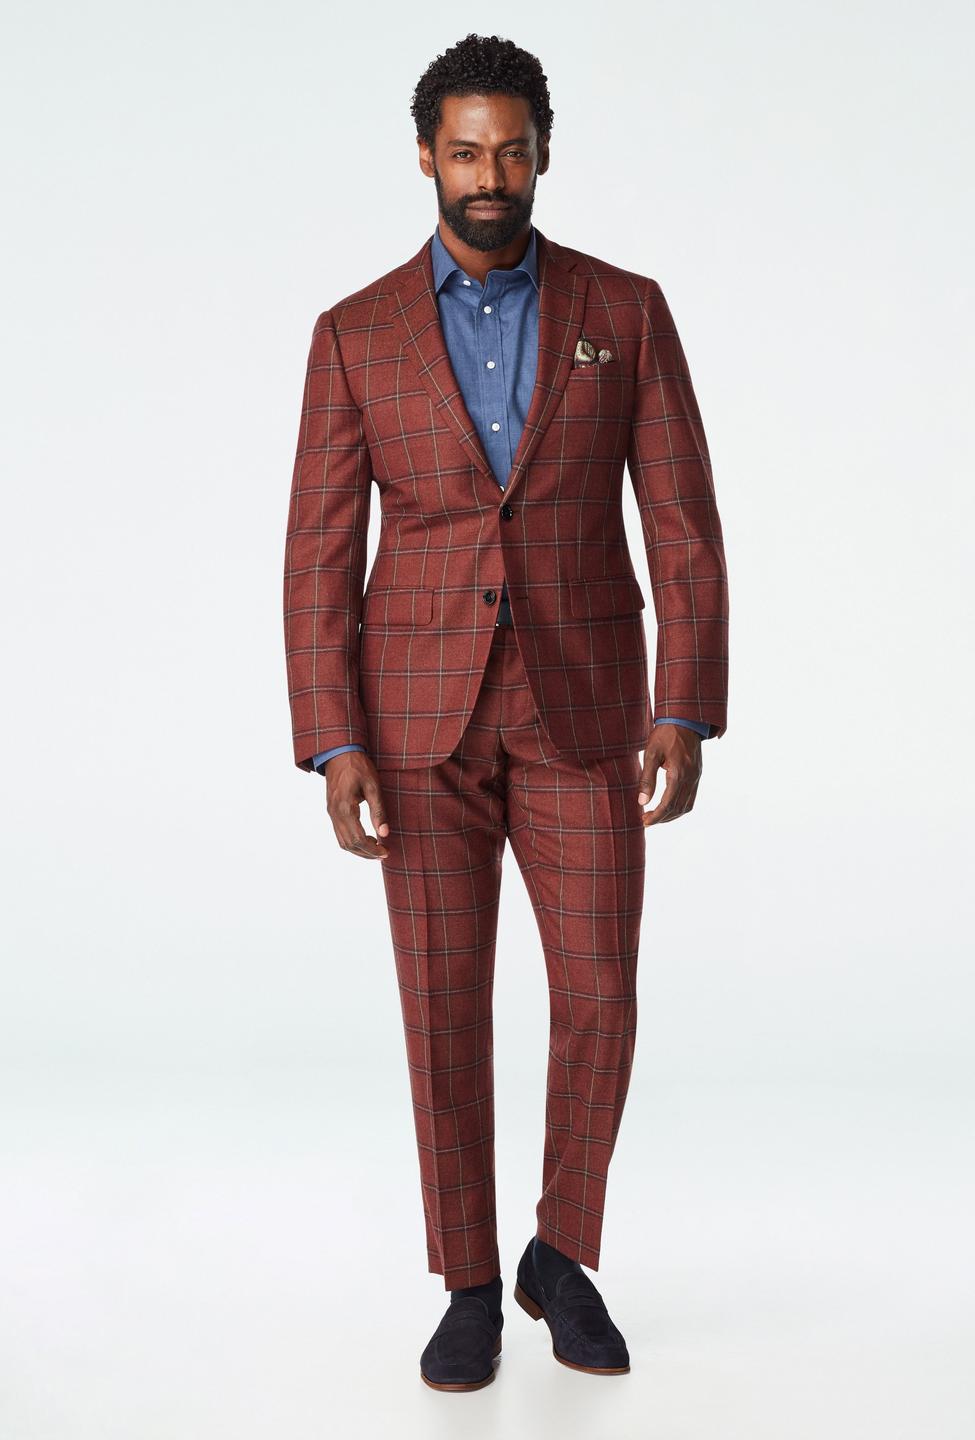 Red suit - Darley Plaid Design from Seasonal Indochino Collection